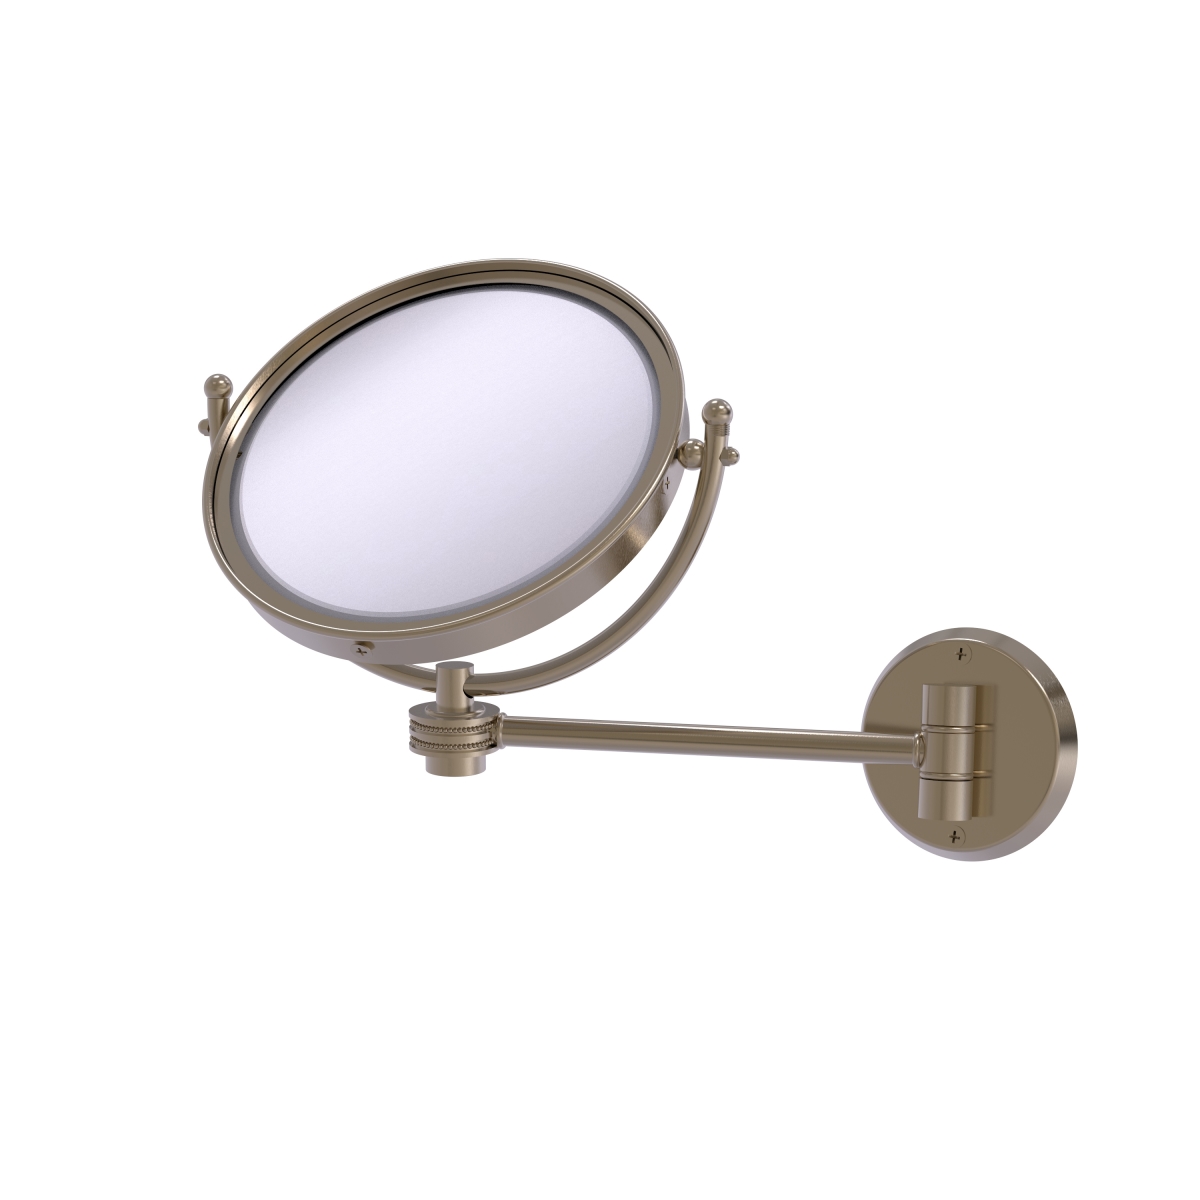 WM-5D-2X-PEW 8 in. Wall Mounted Make-Up Mirror 2X Magnification, Antique Pewter - 10 x 8 x 11 in -  Allied Brass, WM-5D/2X-PEW